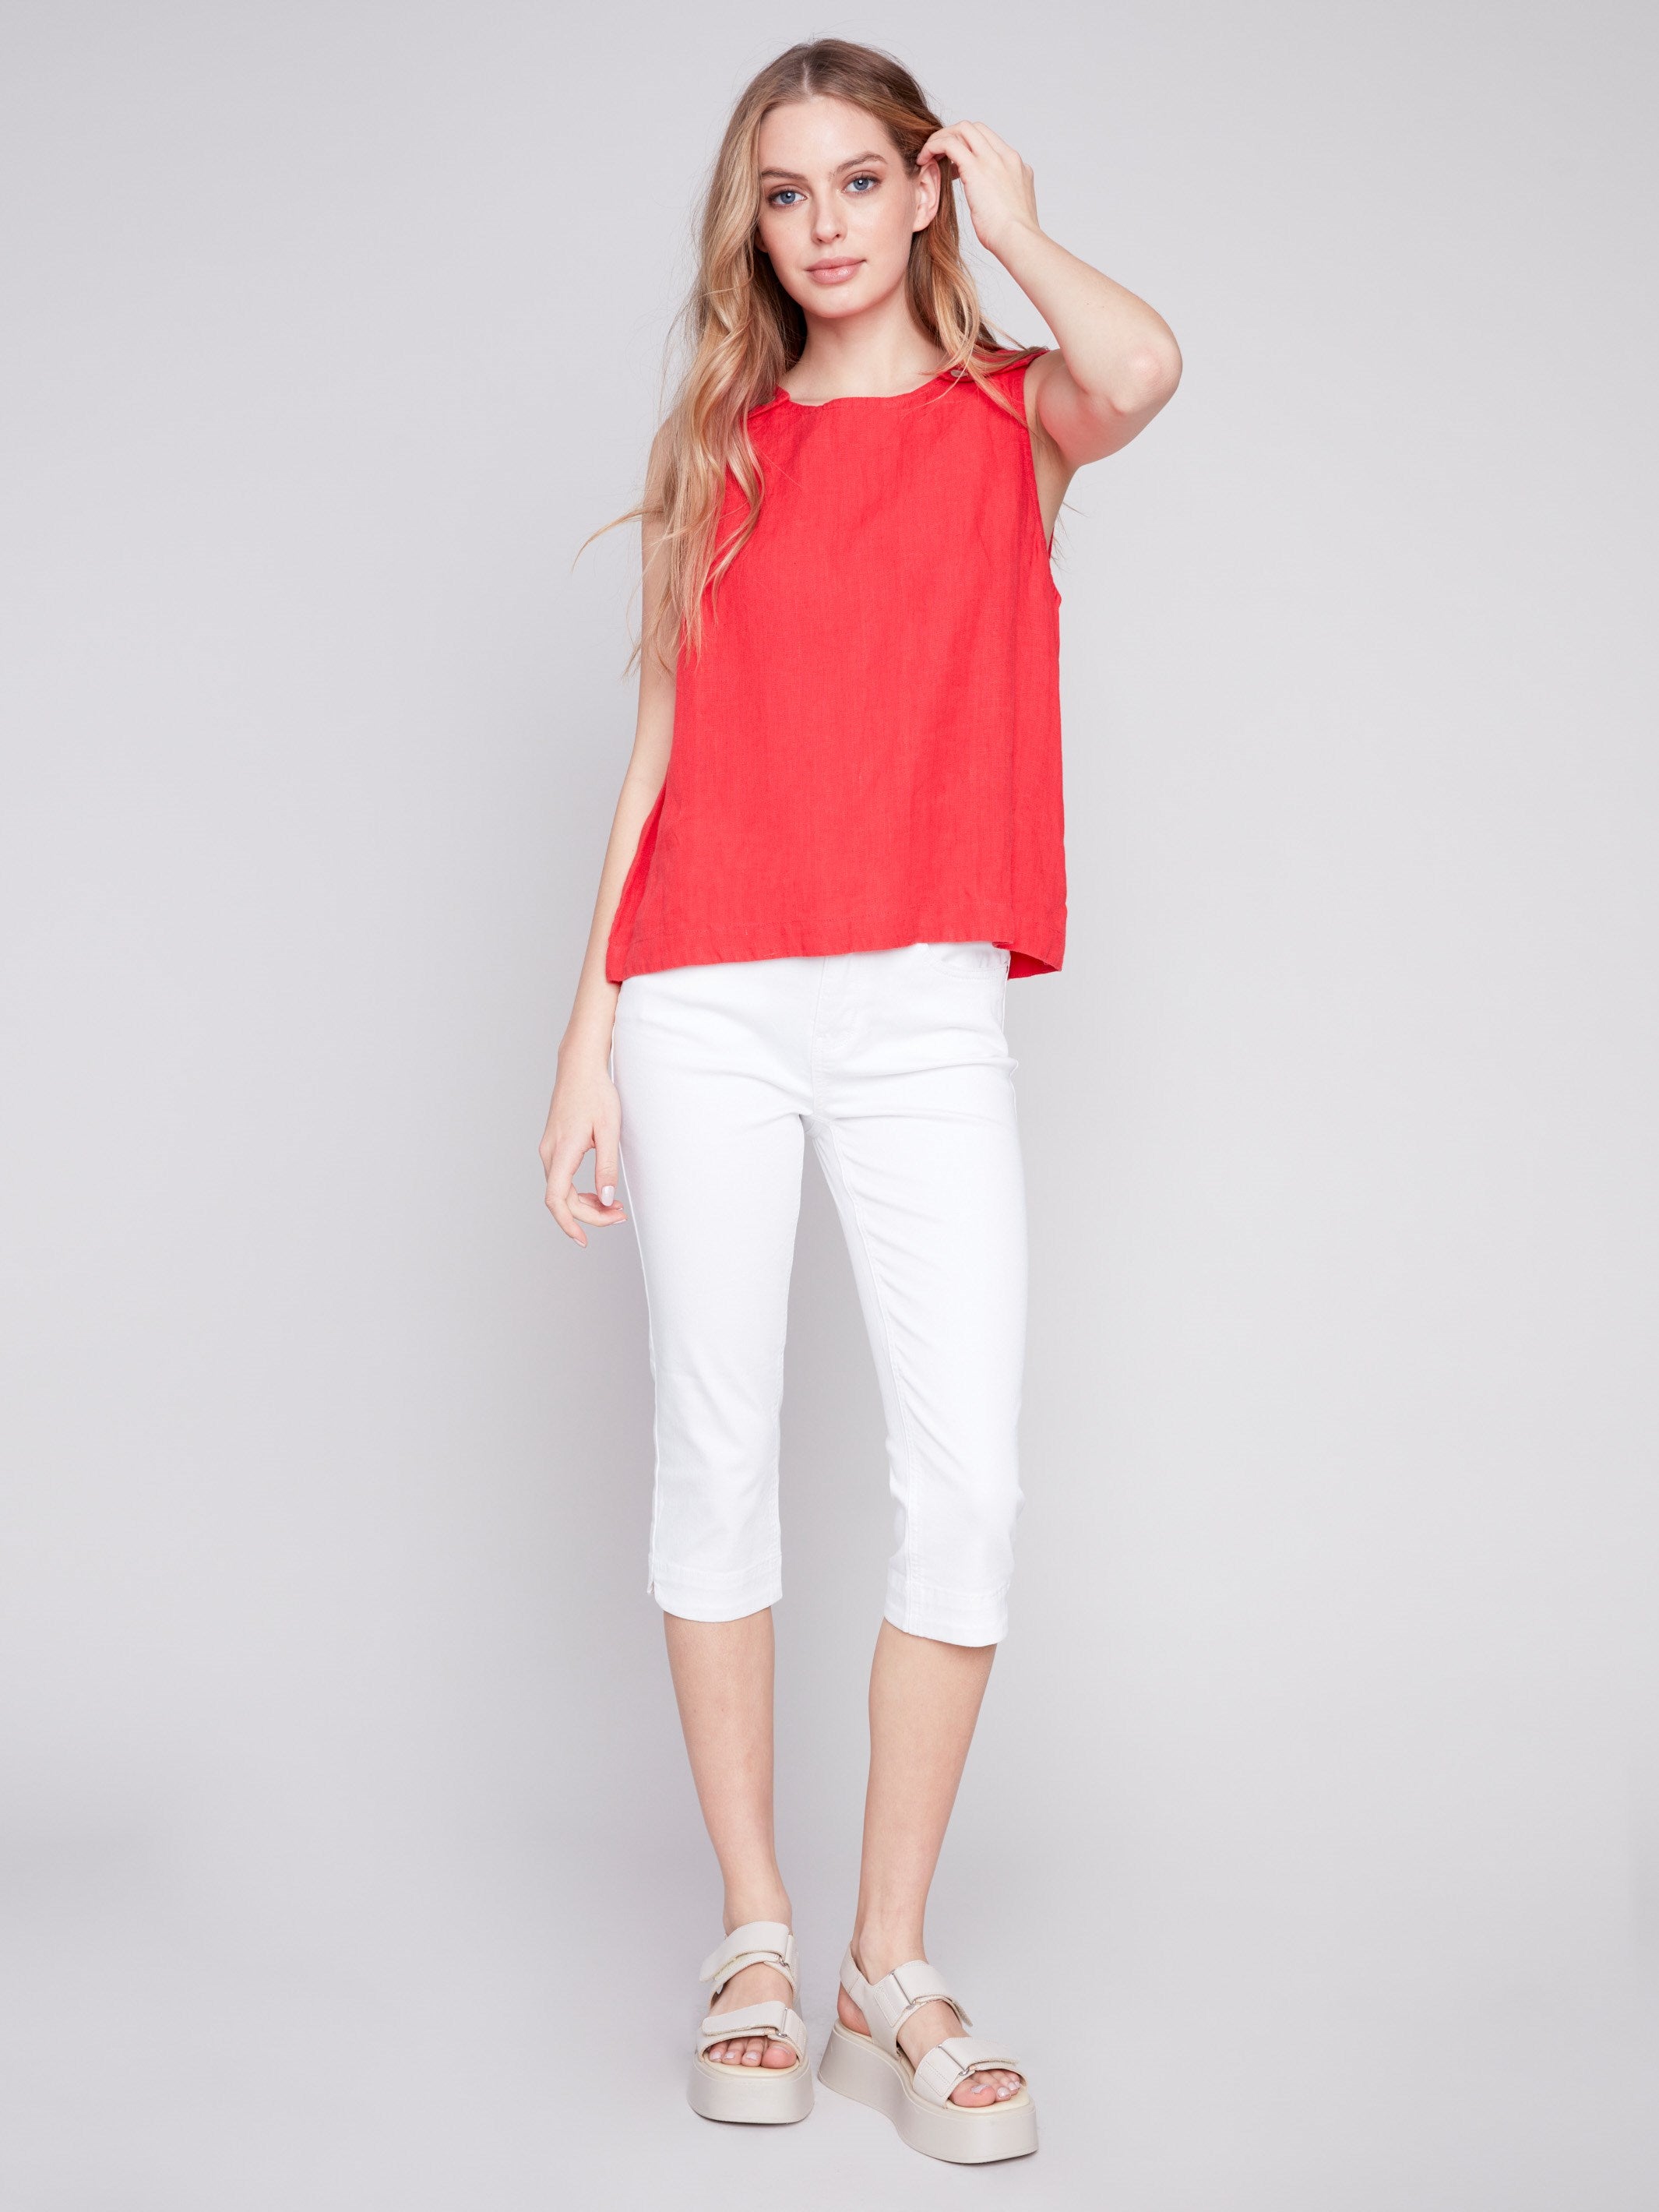 Charlie B Sleeveless Linen Top with Button Detail - Cherry - Image 3